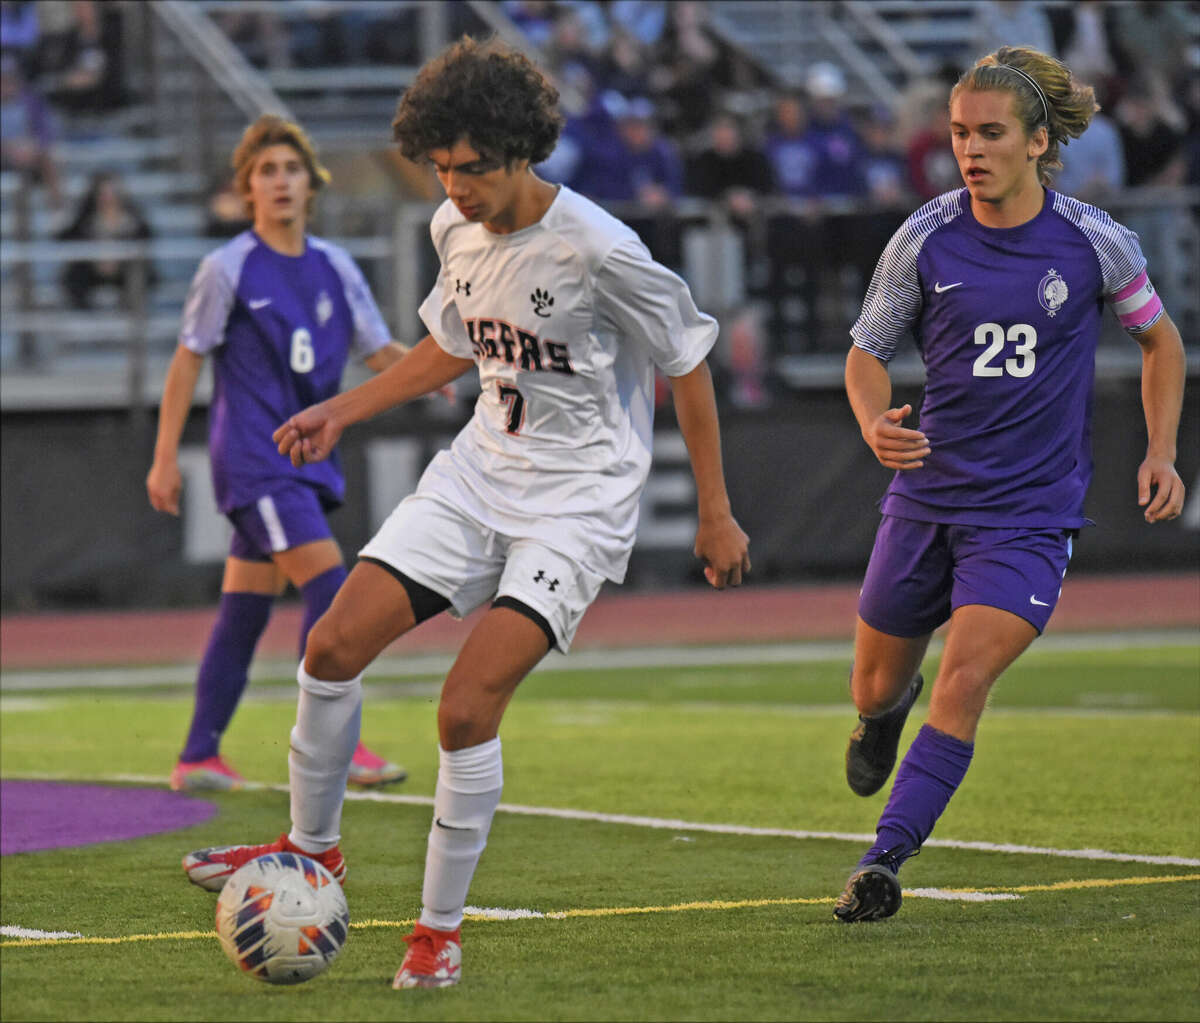 Edwardsville's Colin McGinnis with possession against Collinsville on Saturday in the Class 3A Collinsville Regional championship game in Collinsville.